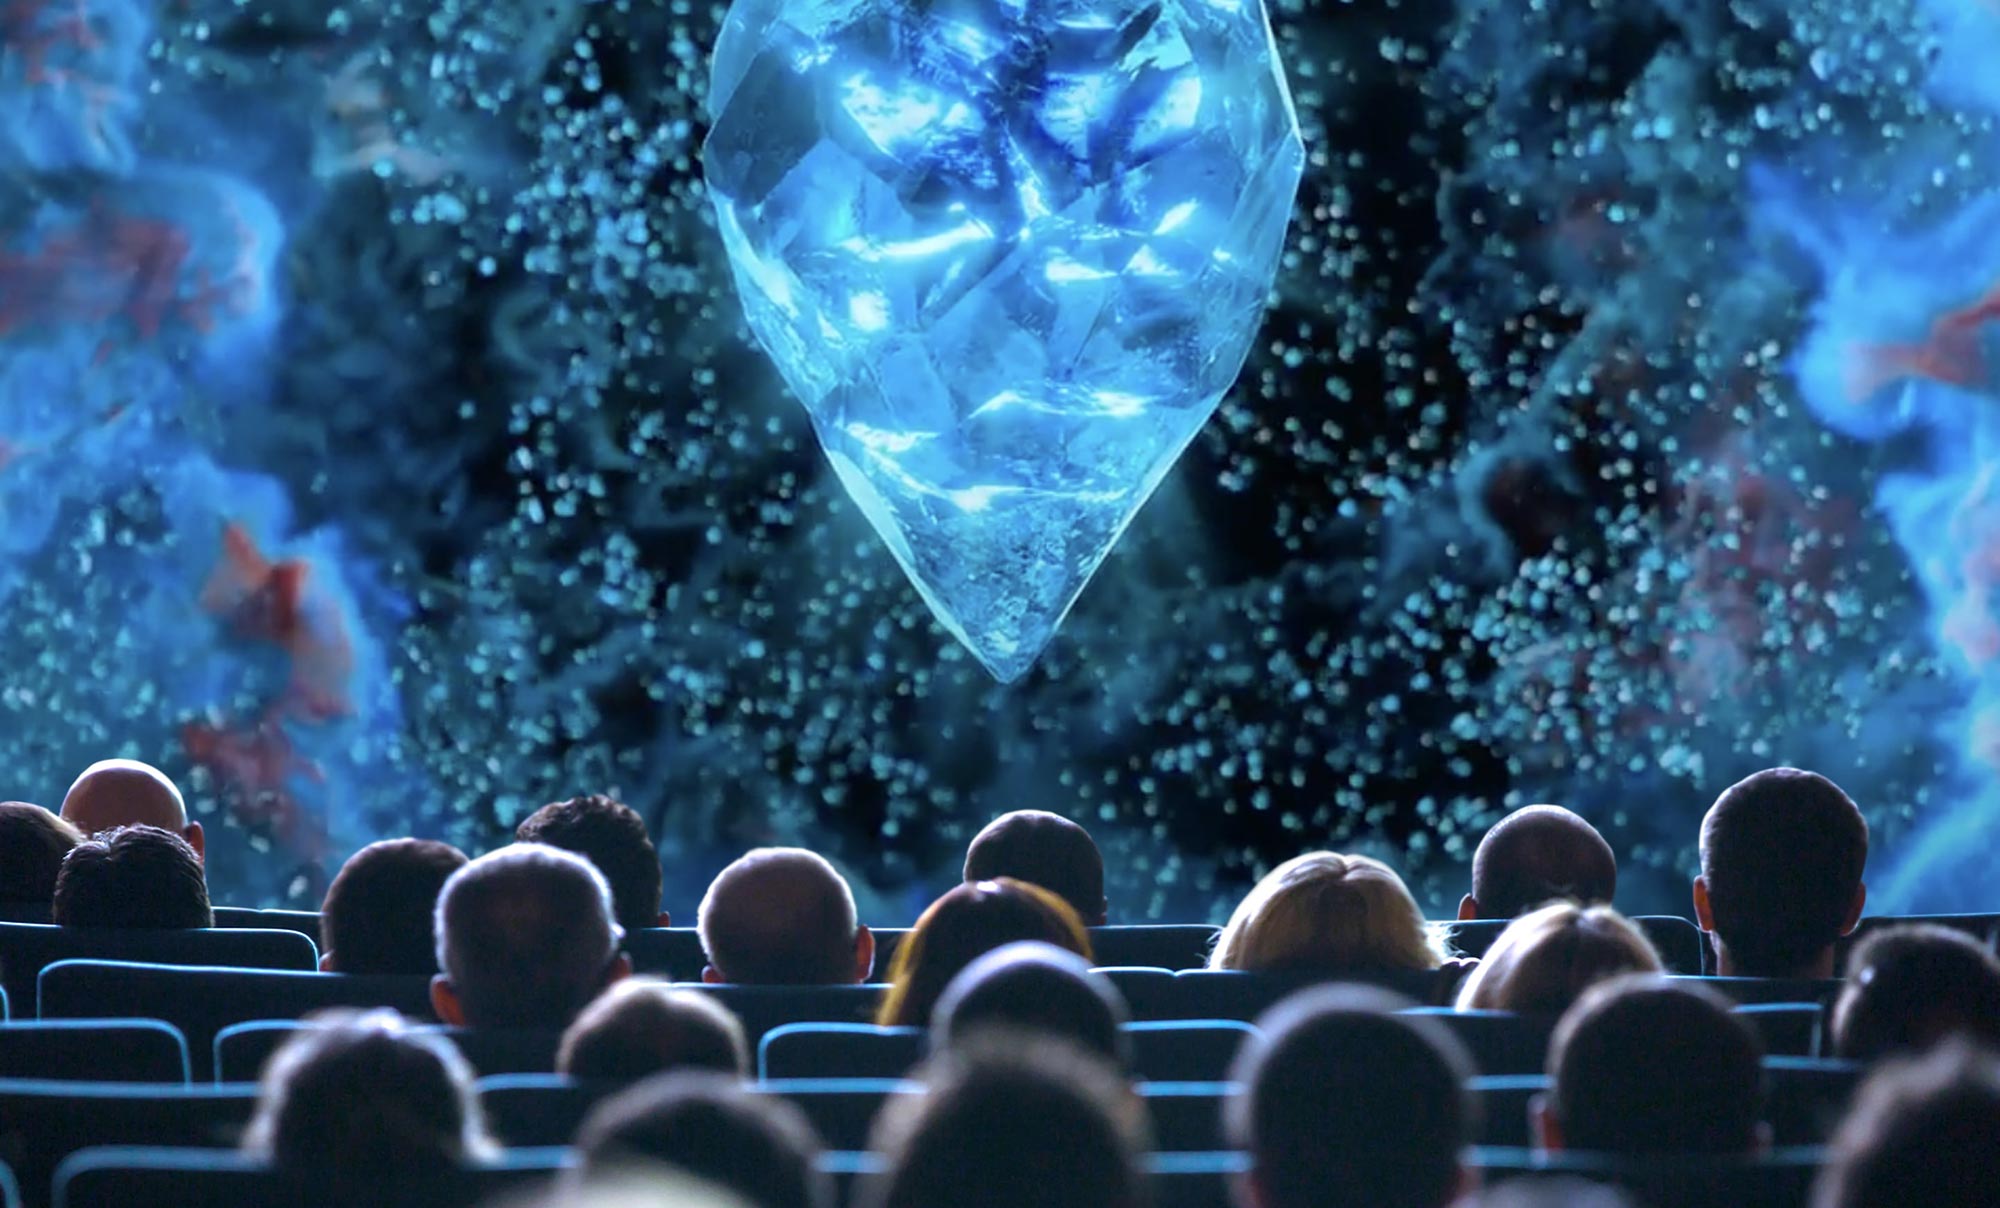 People in a movie theatre viewing a crystal on the screen.